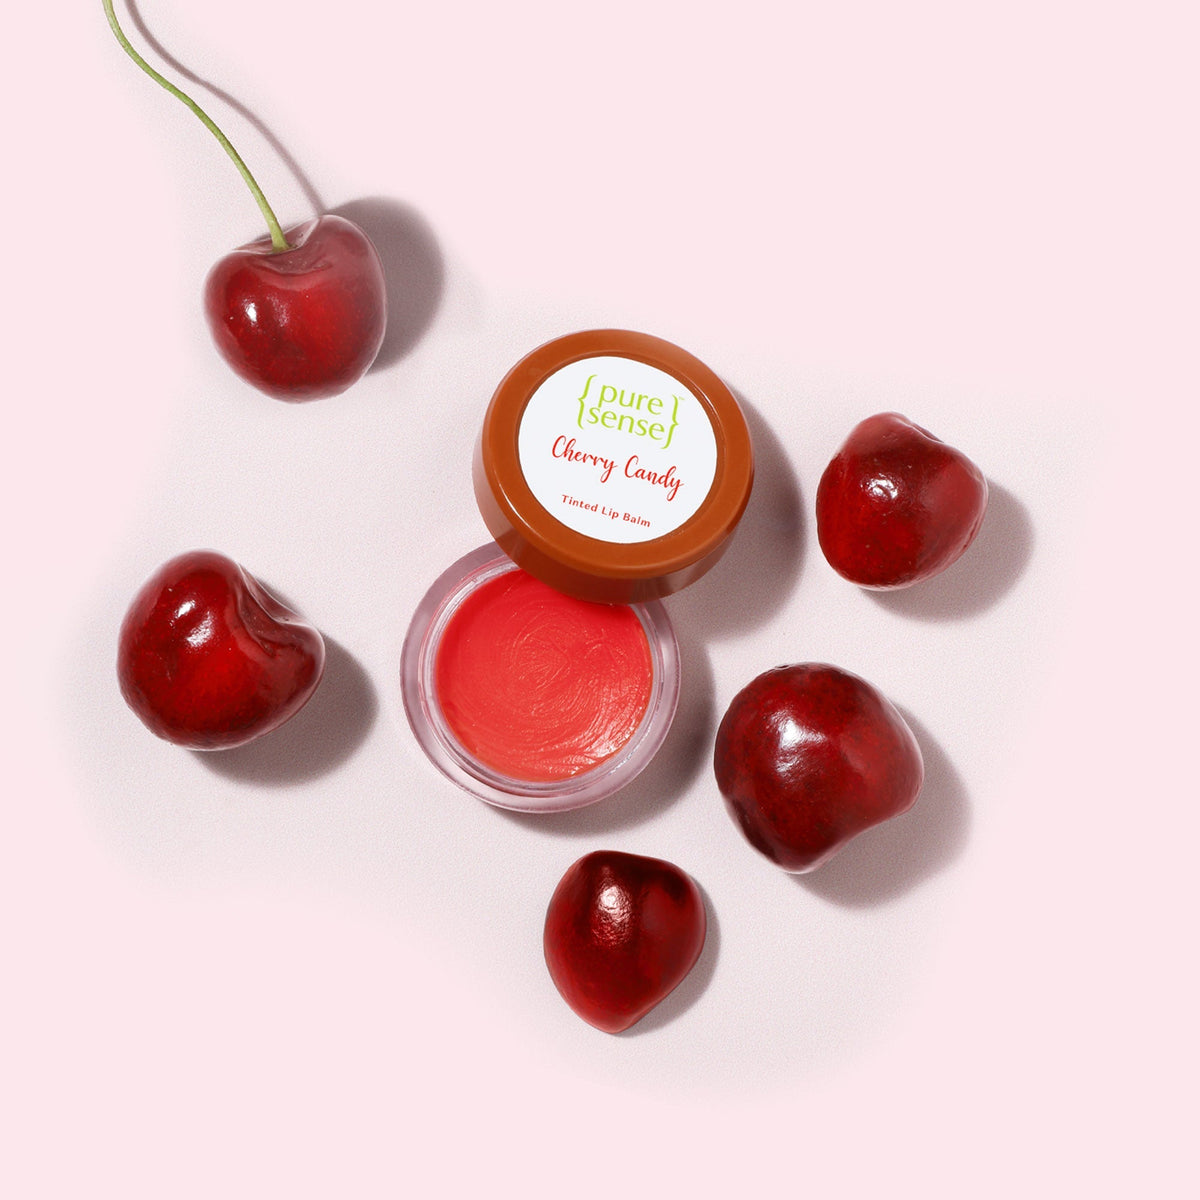 Cherry Candy Tinted Lip Balm | From the makers of Parachute Advansed | 5 ml